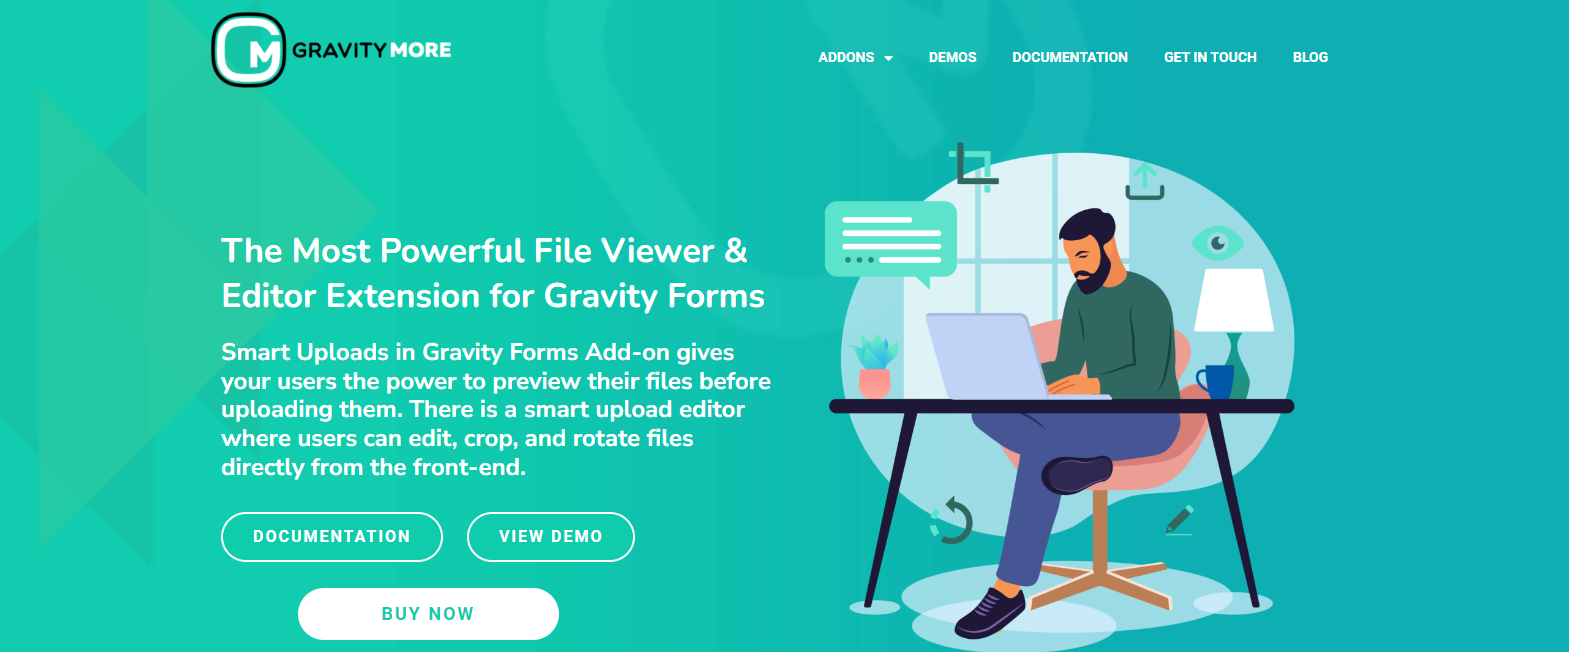 Purchase Your Gravity More Plugin